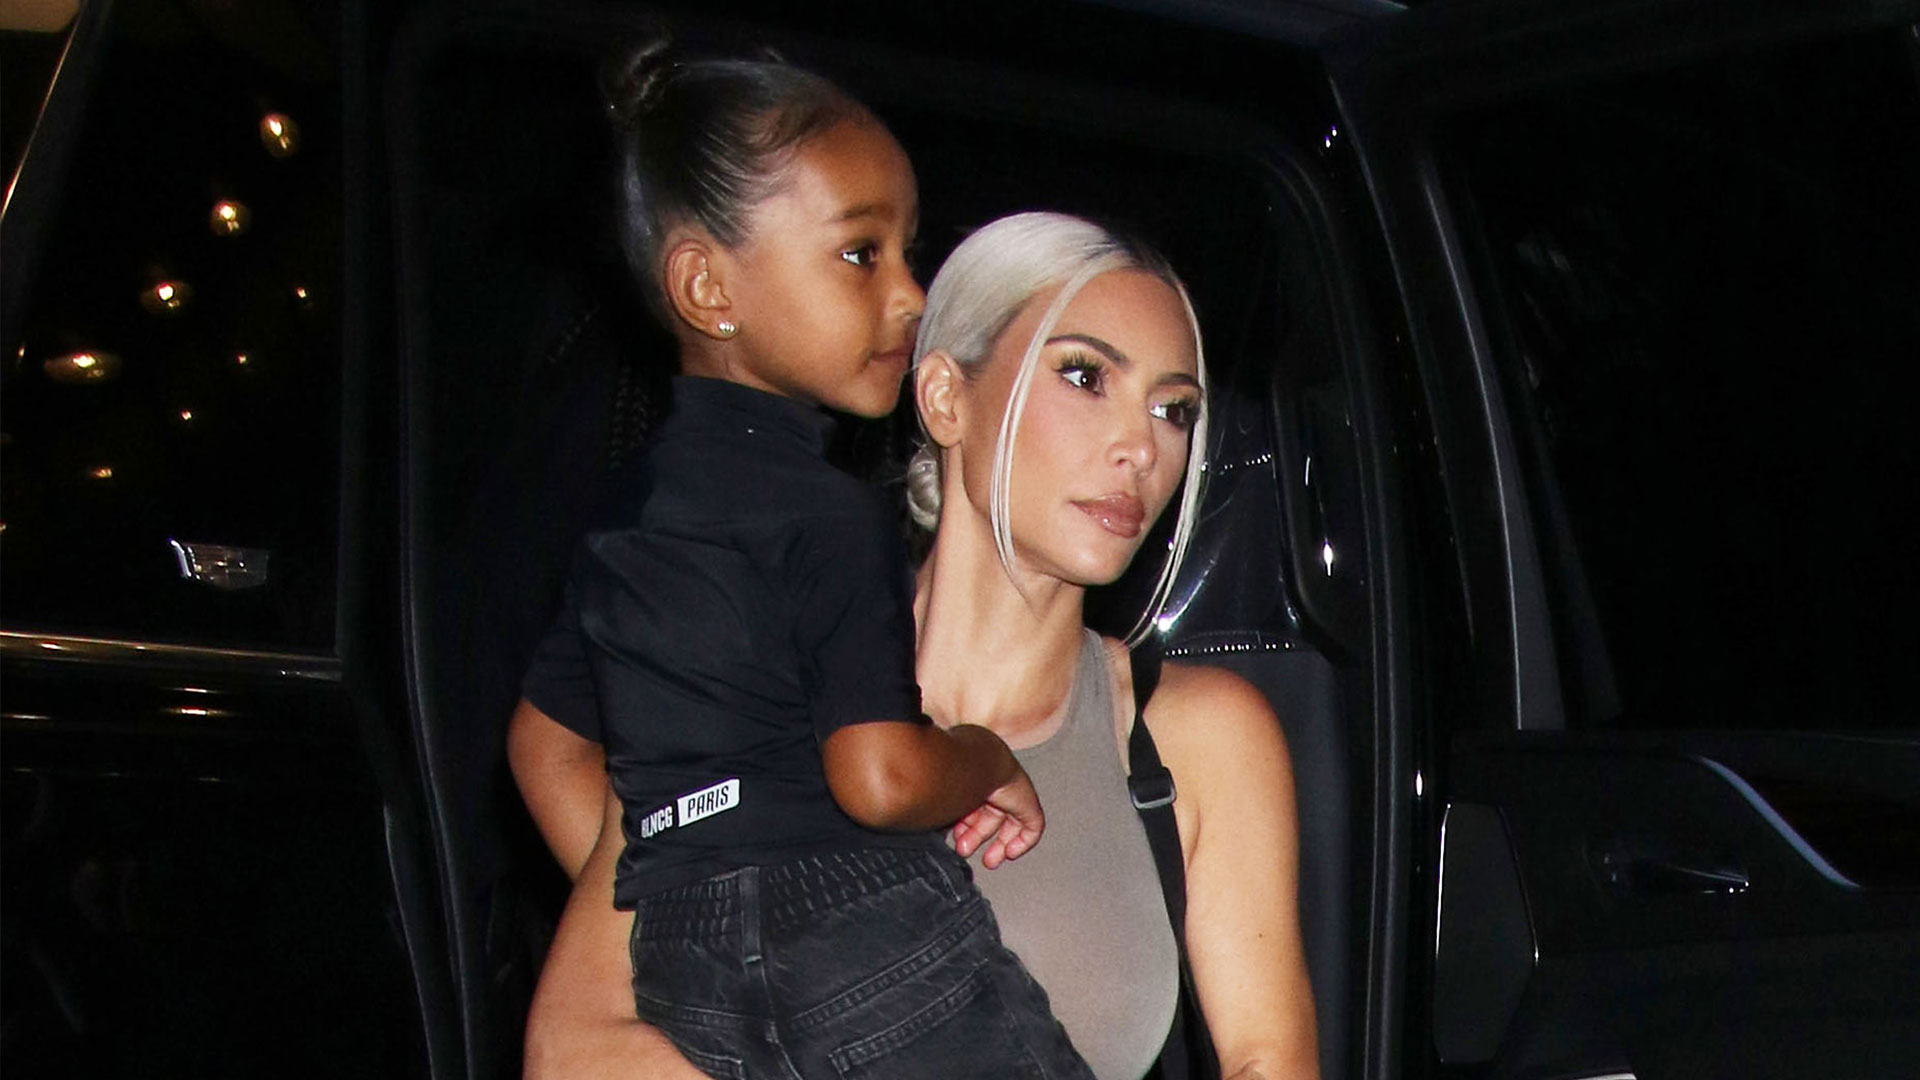 Kim Kardashian is criticized for dressing Chicago, her 4-year-old daughter in inappropriate clothing during a New York shopping trip